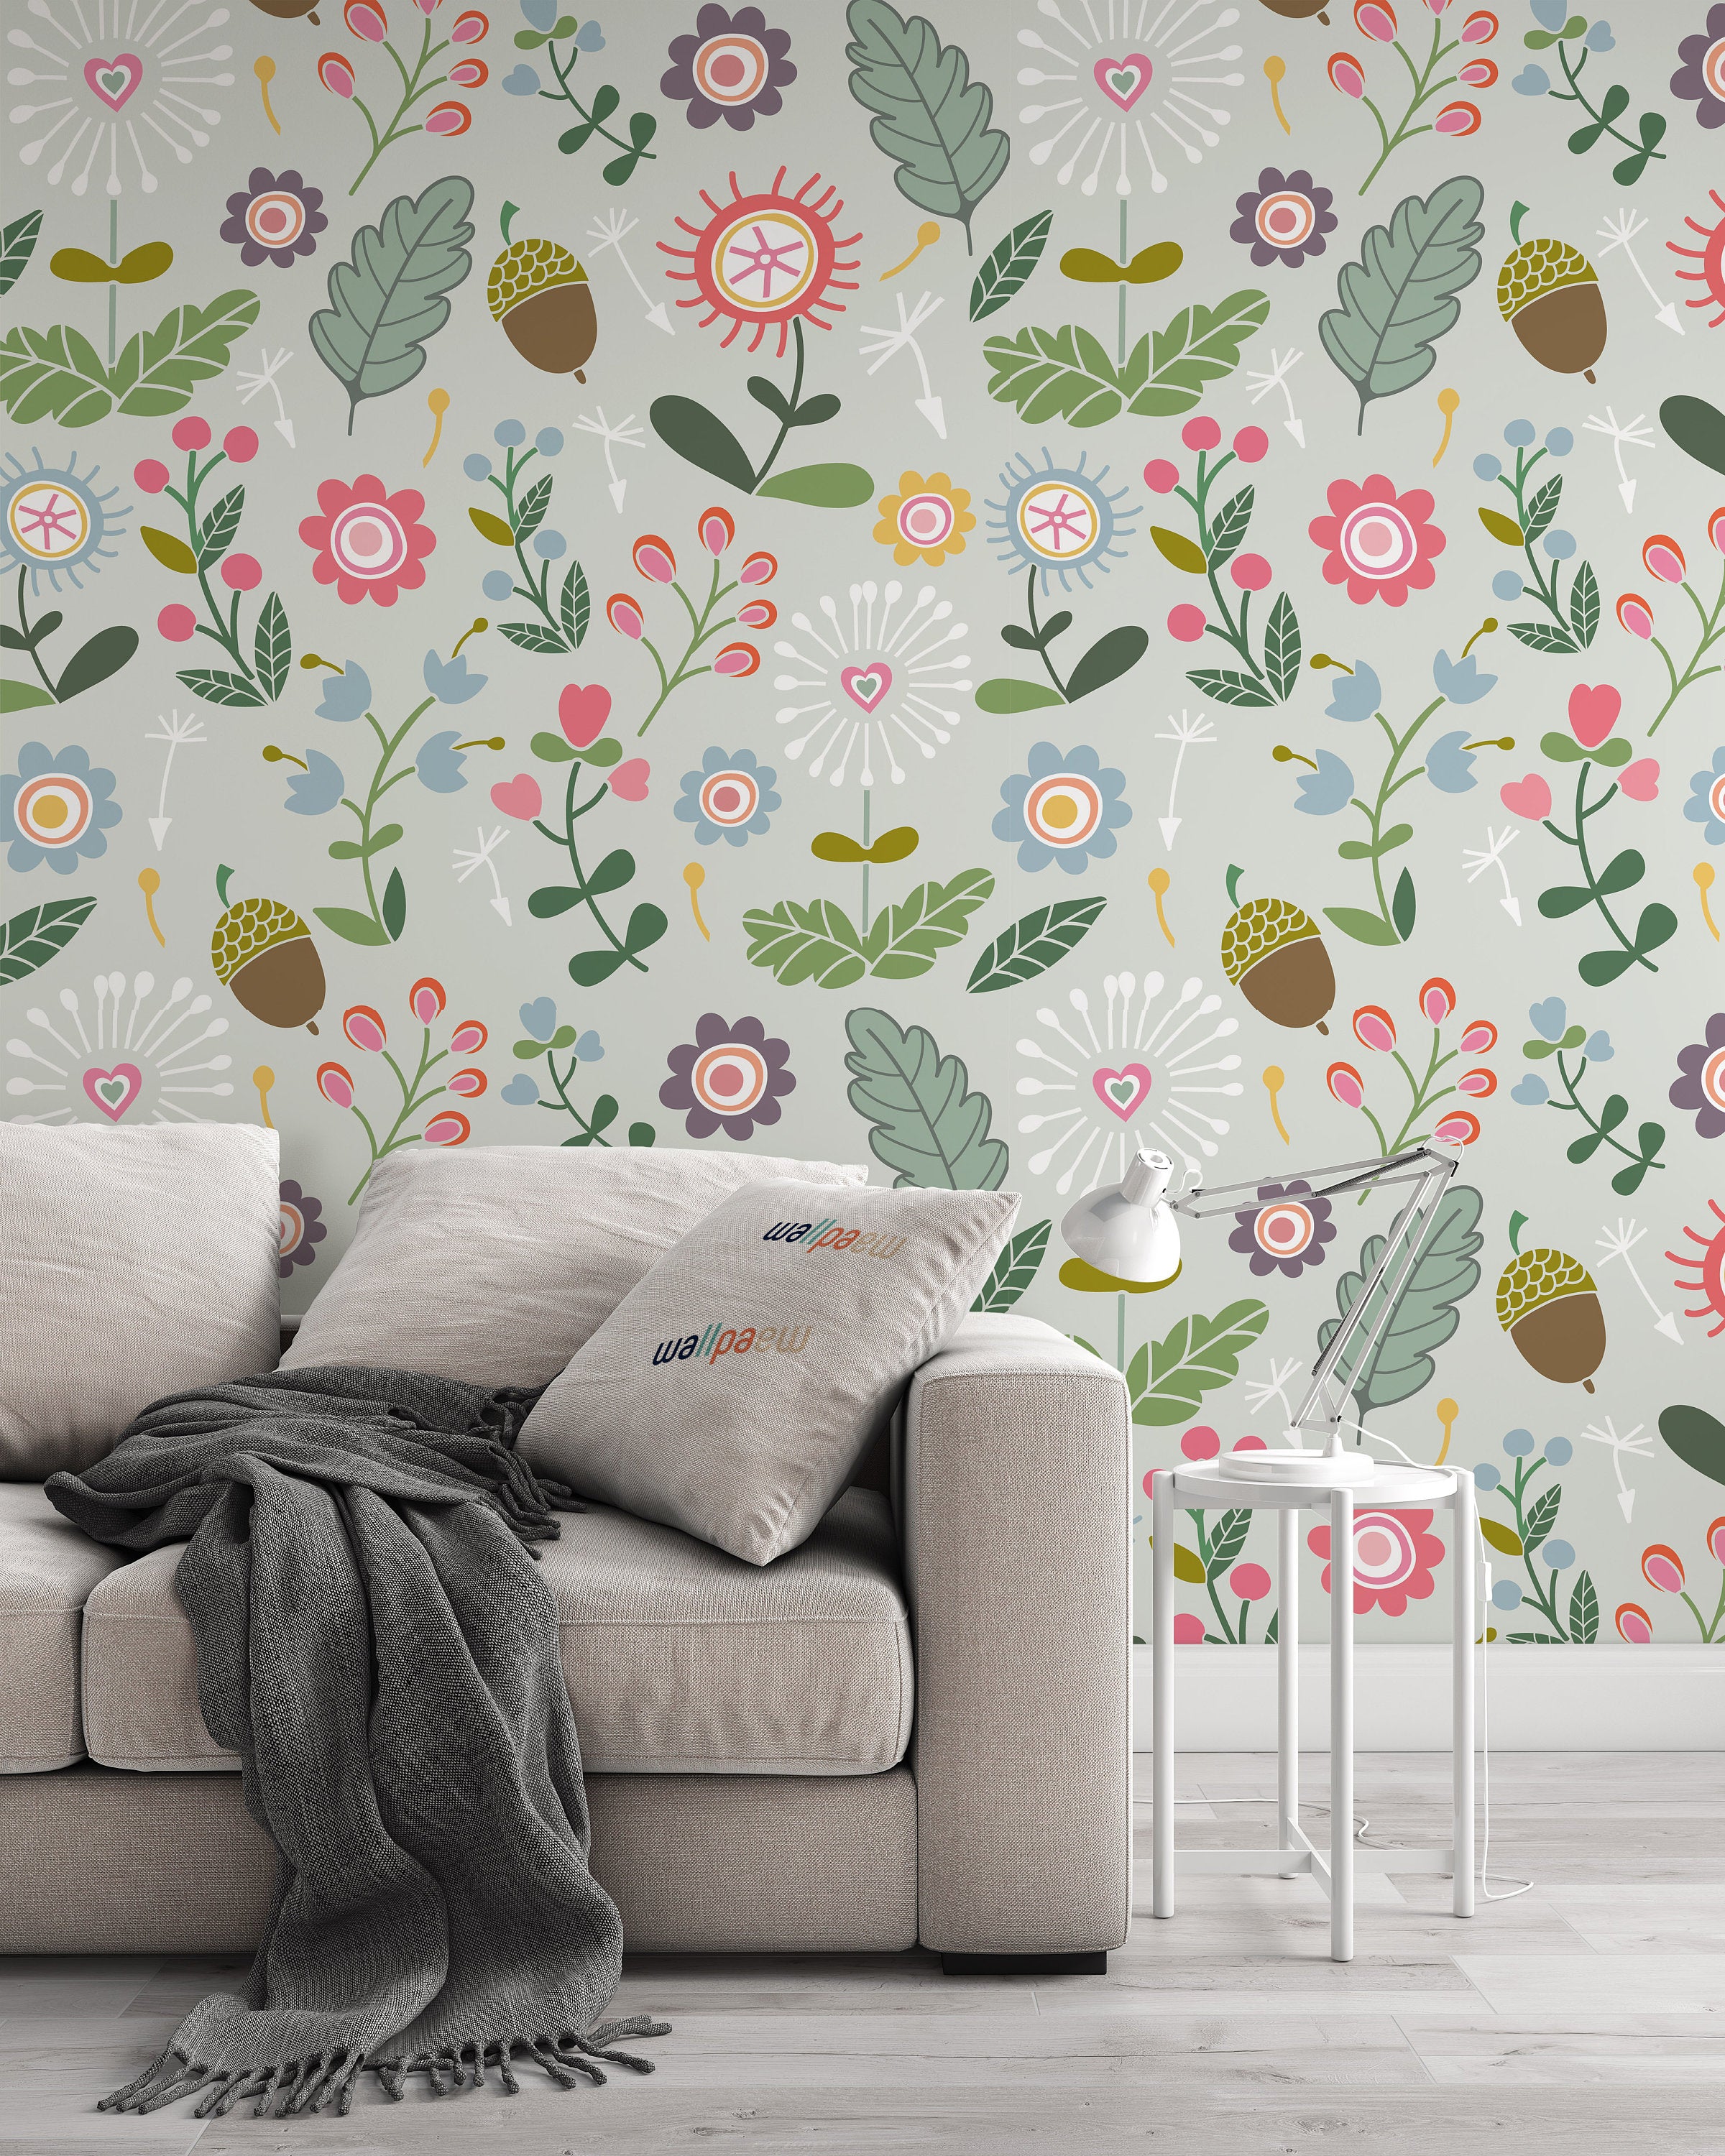 Hazelnut Colorful Flowers Leaves Water Green On The Background Wallpaper Restaurant Living Room Cafe Office Bedroom Mural Home Wall Art